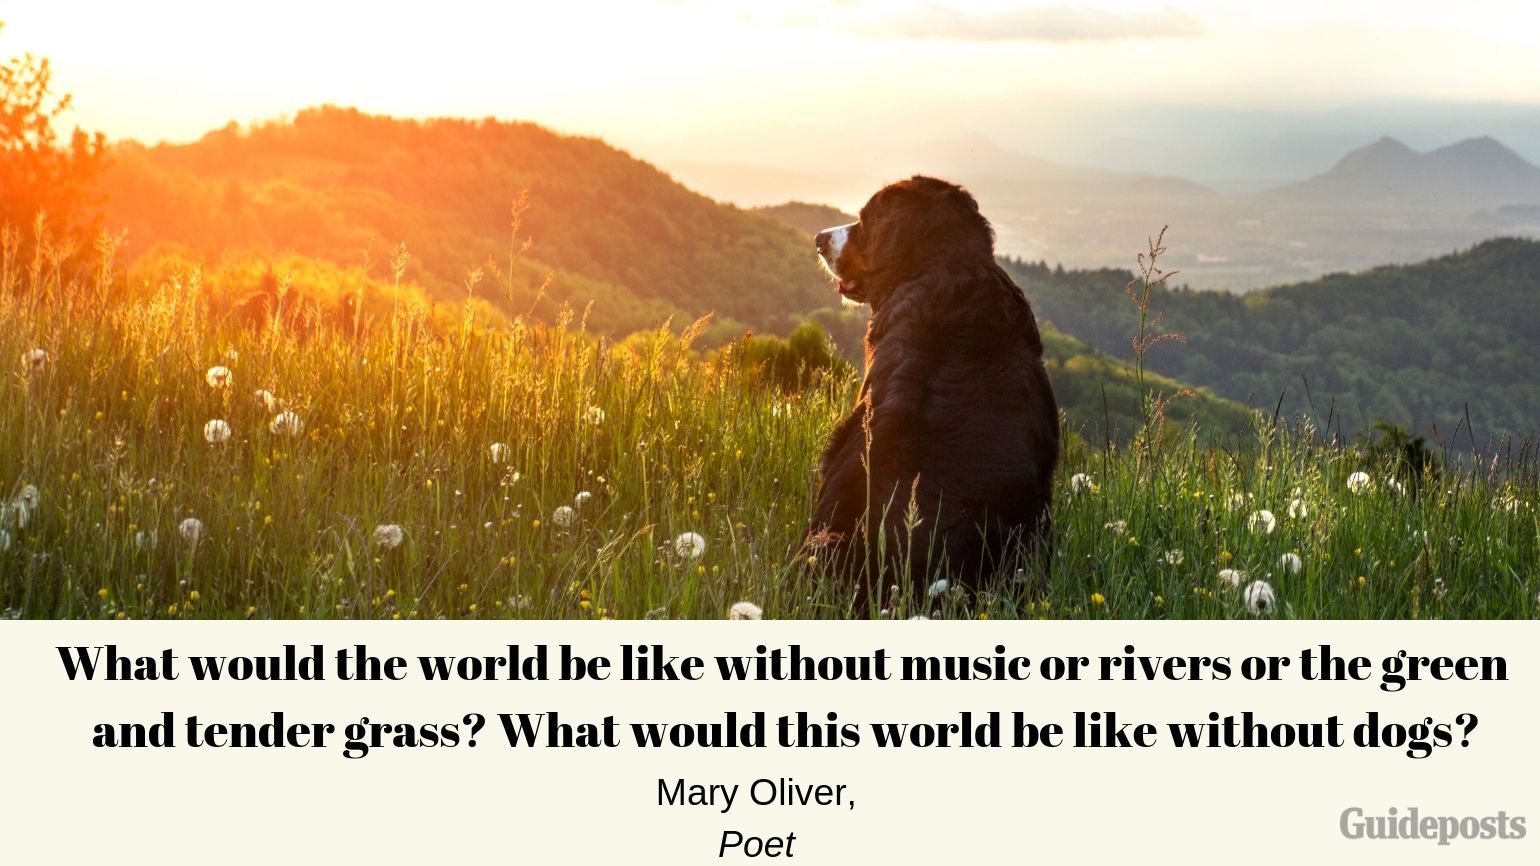 Sentimental Dog Quote: What would the world be like without music or rivers or the green and tender grass? What would this world be like without dogs? ―Mary Oliver, Poet dog lover